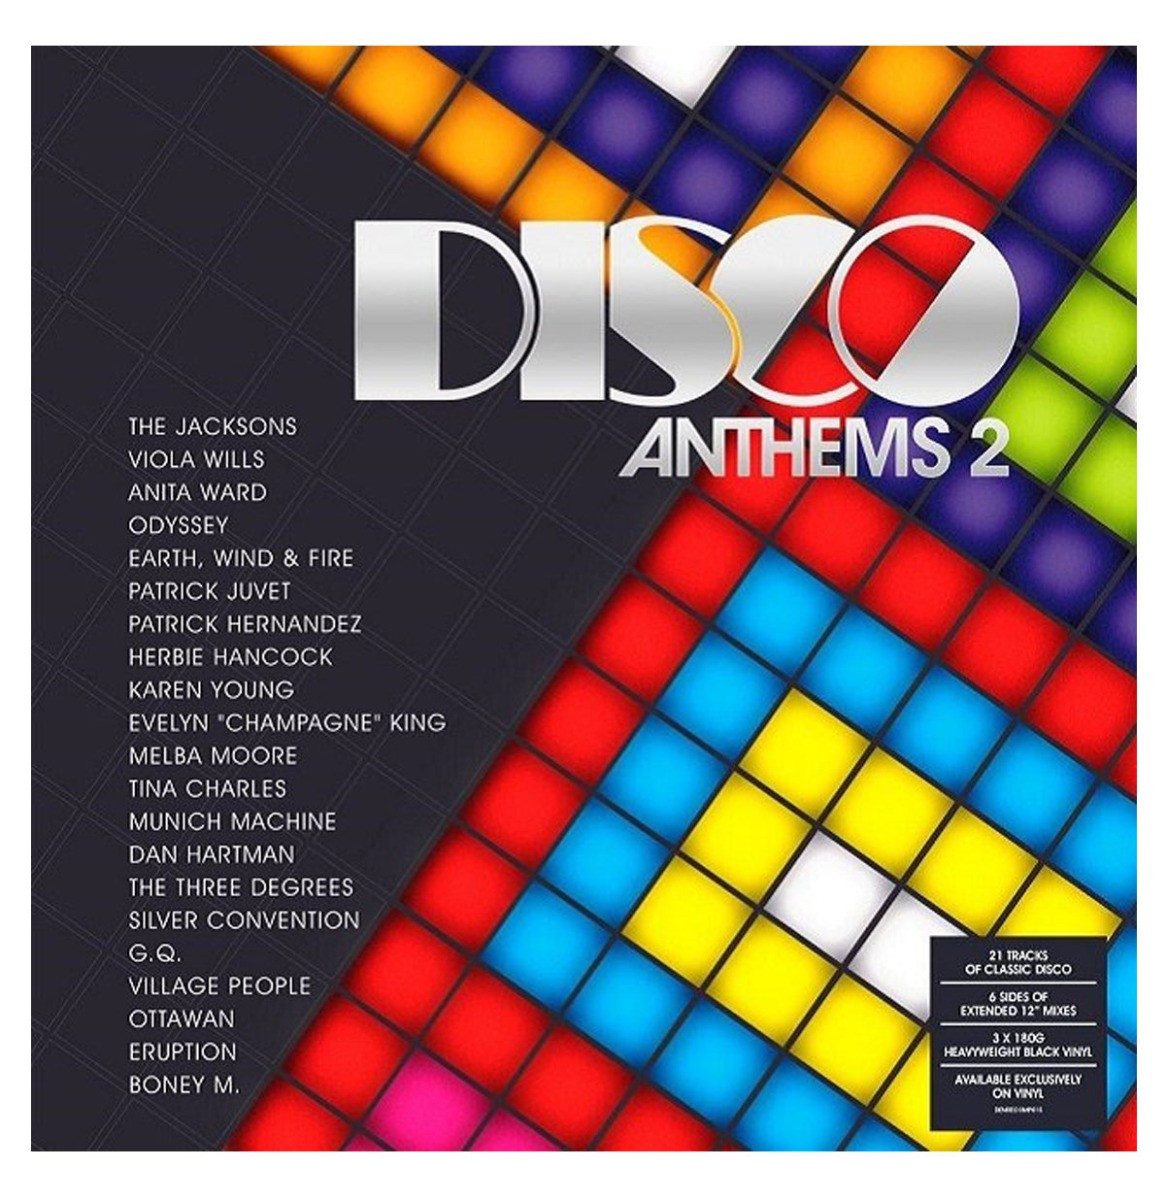 Various Artists - Disco Anthems 2 - 21 Tracks of Classic Disco - 3LP